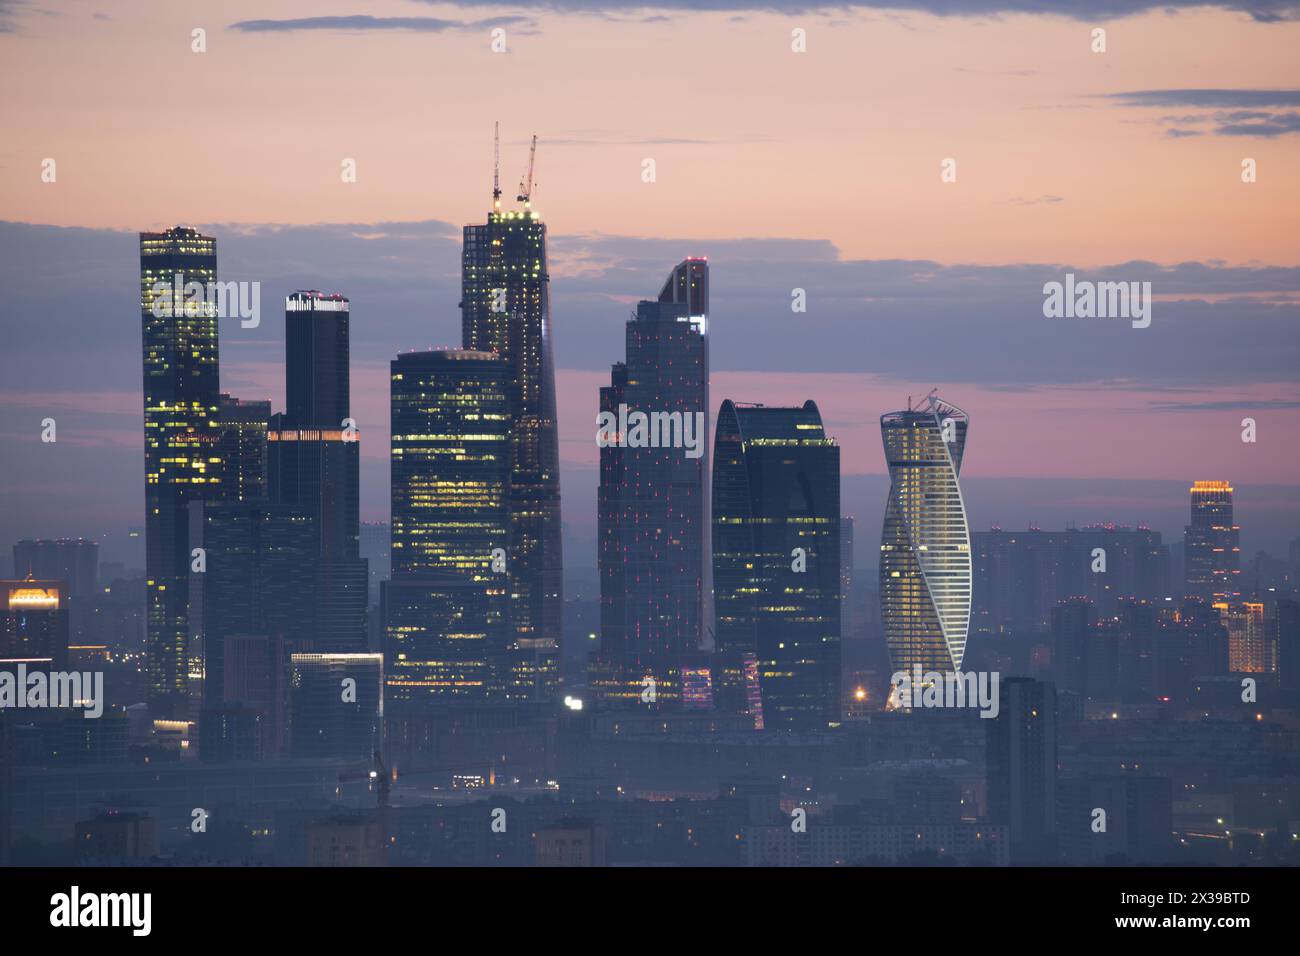 MOSCOW - MAY 24, 2015: Modern Moscow International Business Center in fog. Investments in Moscow International Business Center was approximately 12 bi Stock Photo